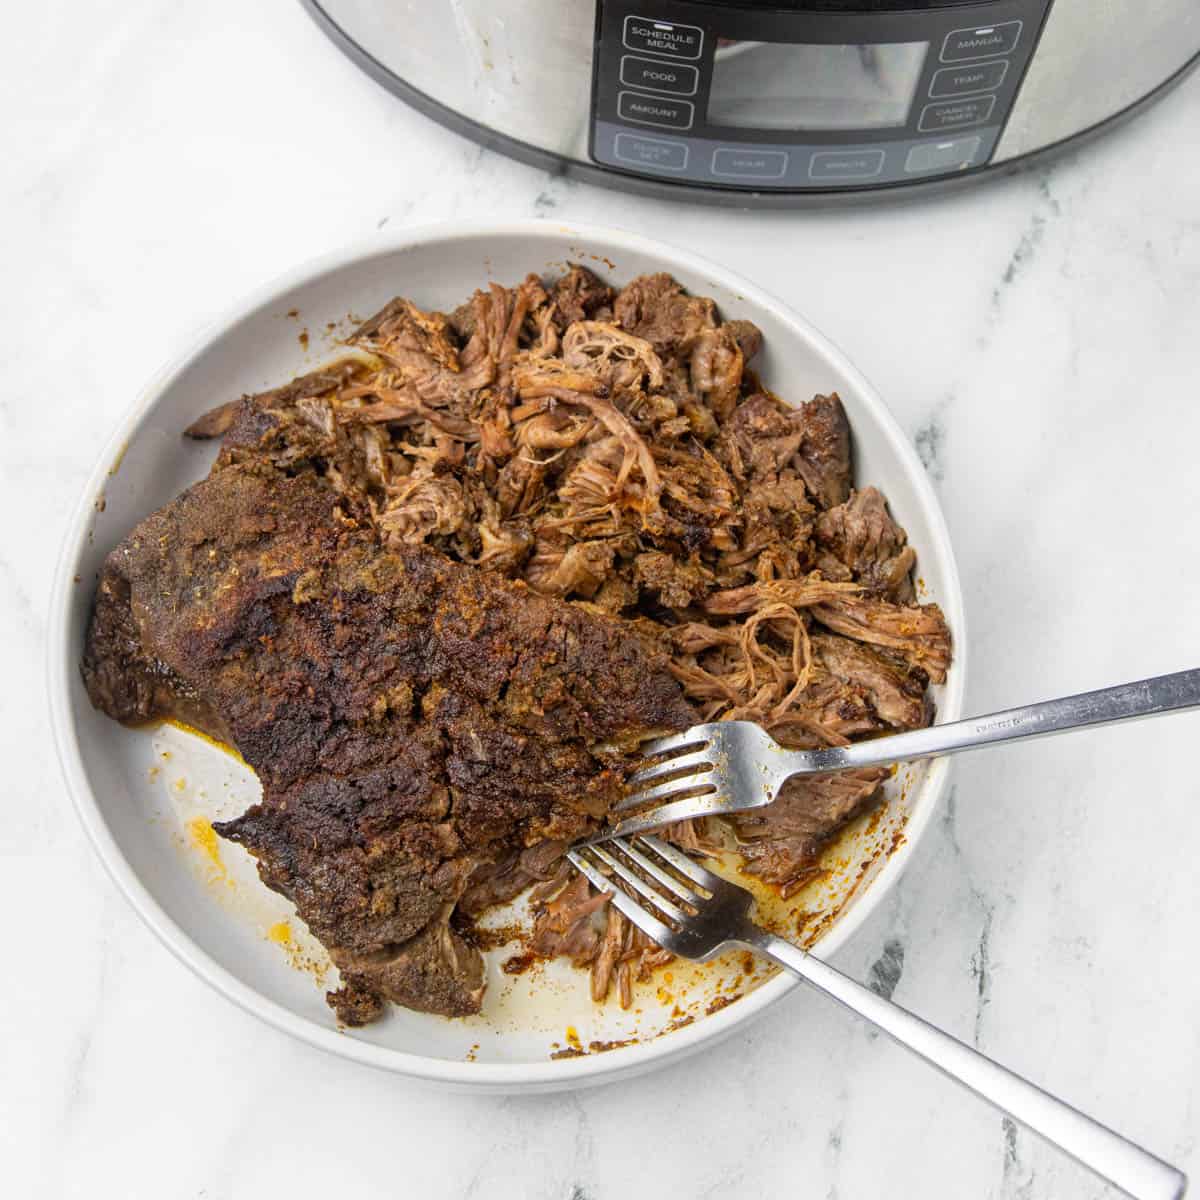 Shredded Beef with forks